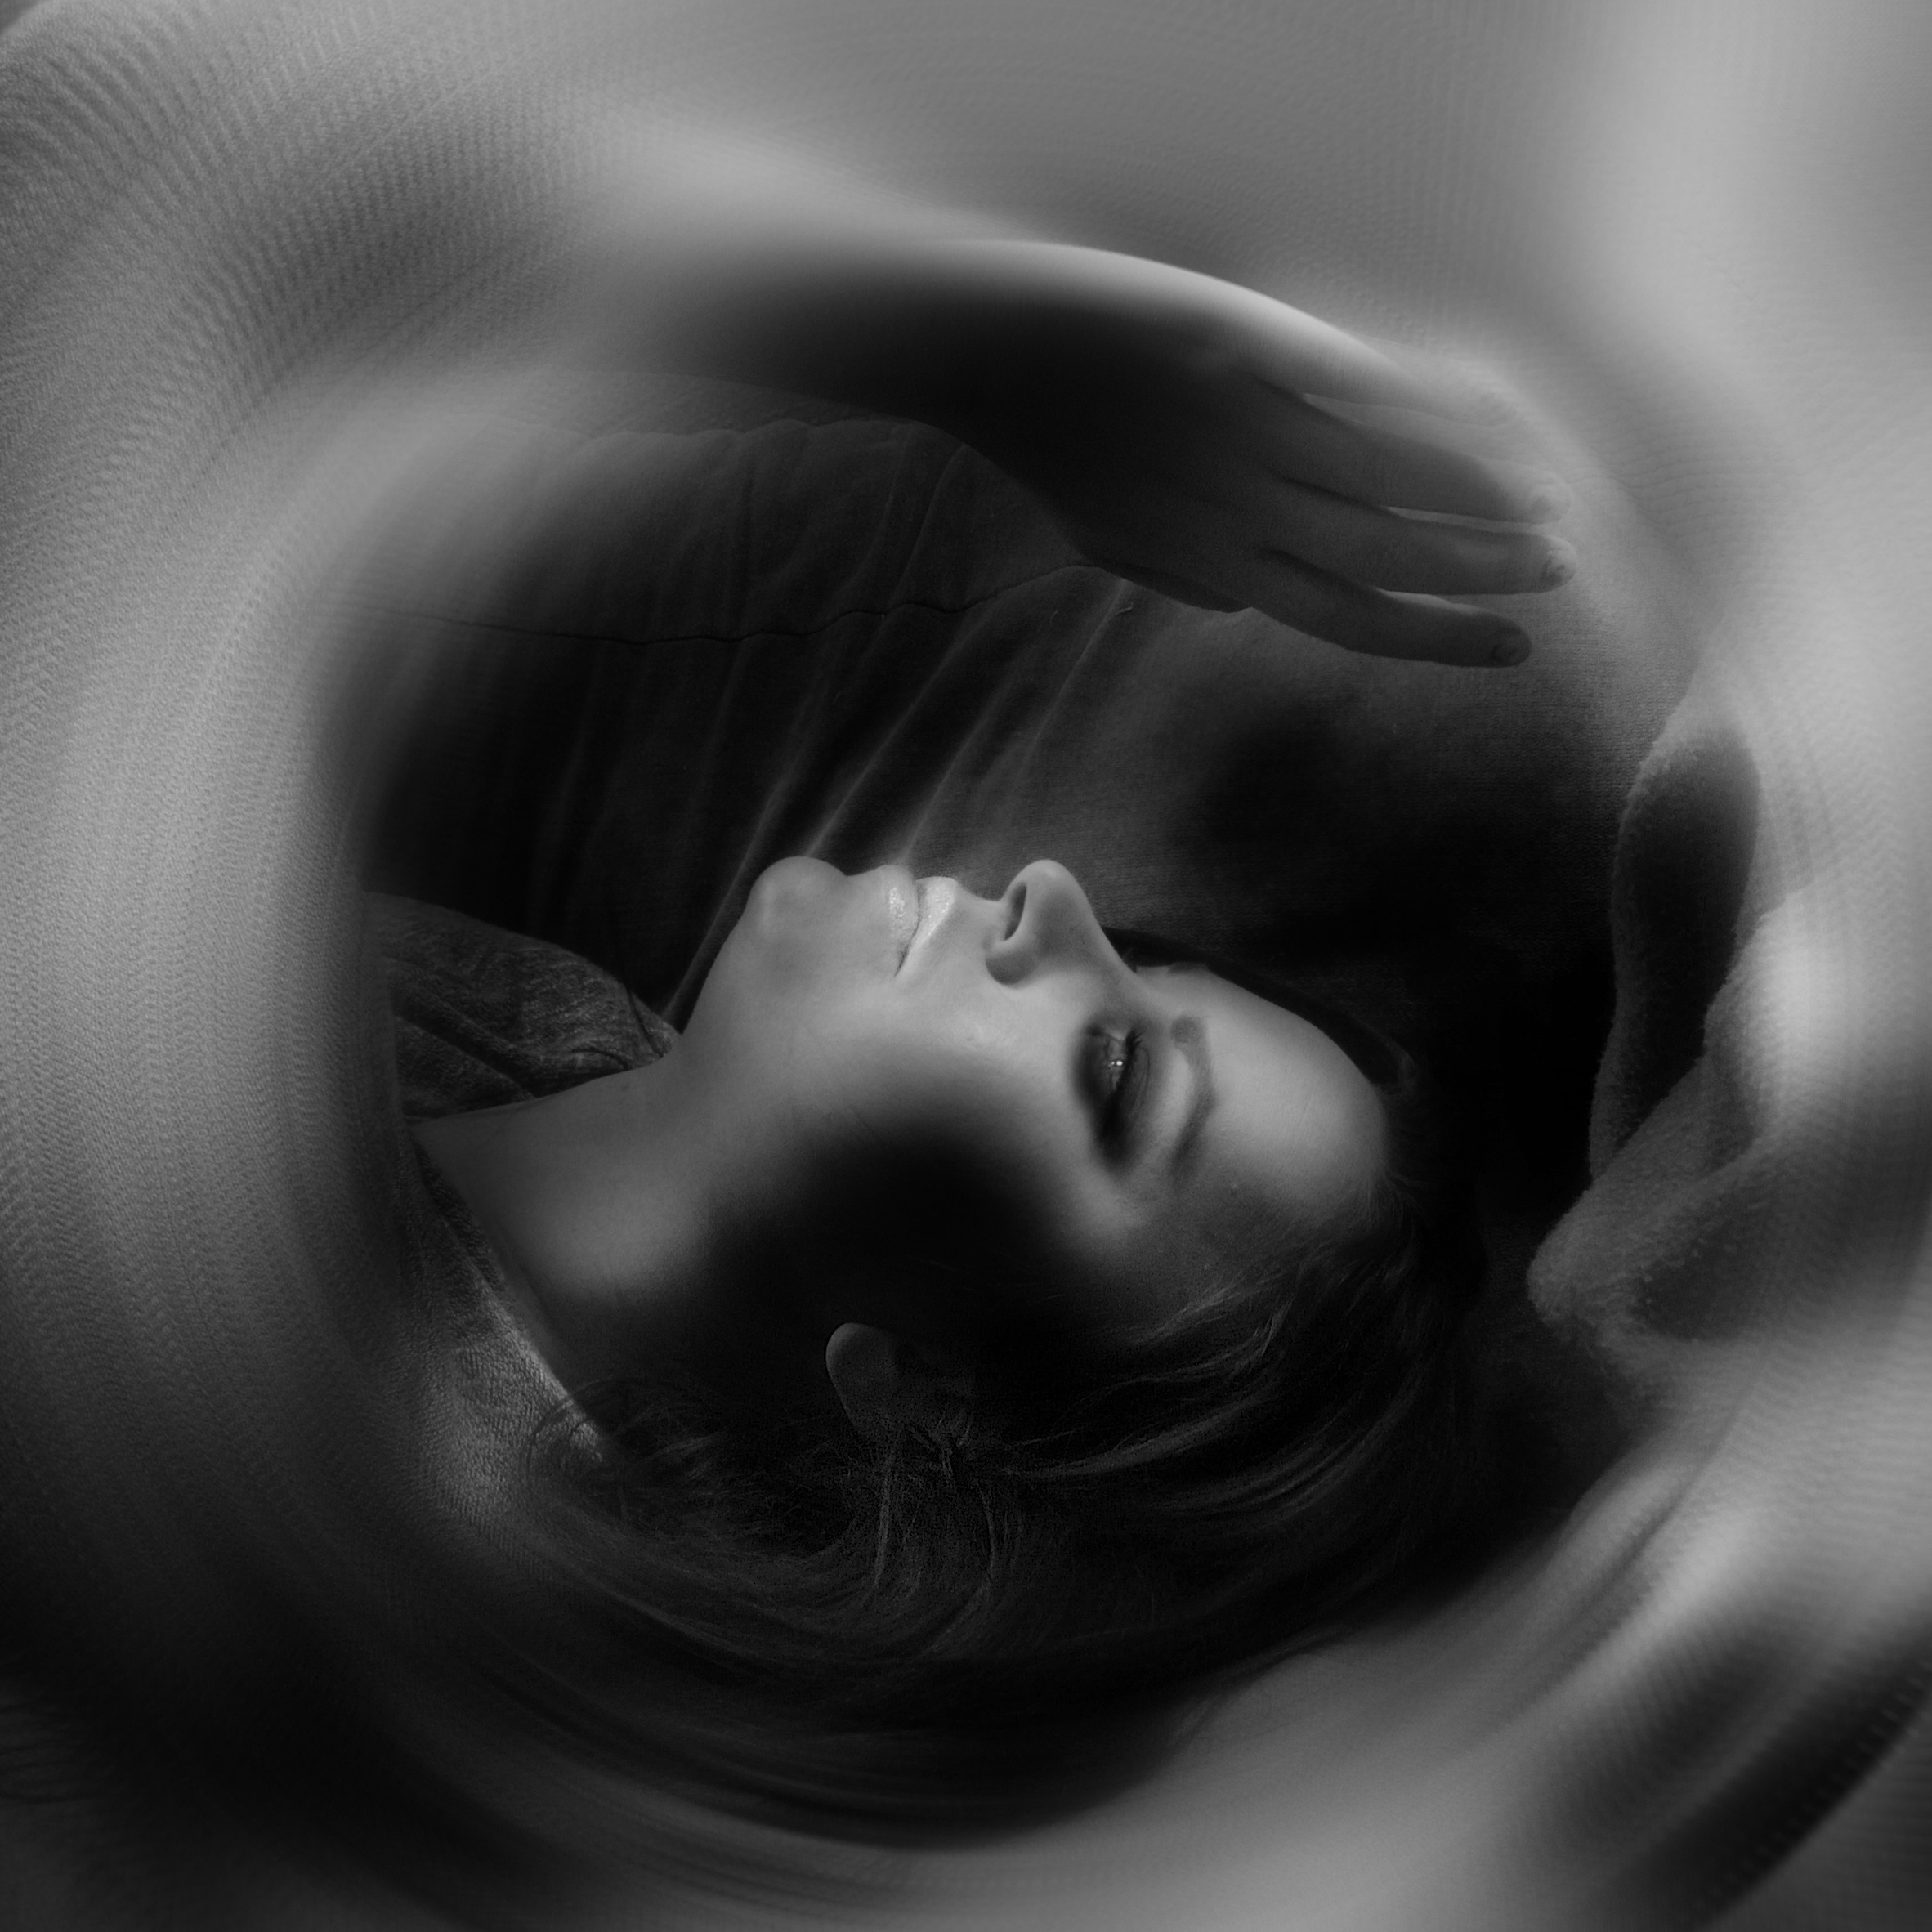 Black and white image of girl with special affects around her.